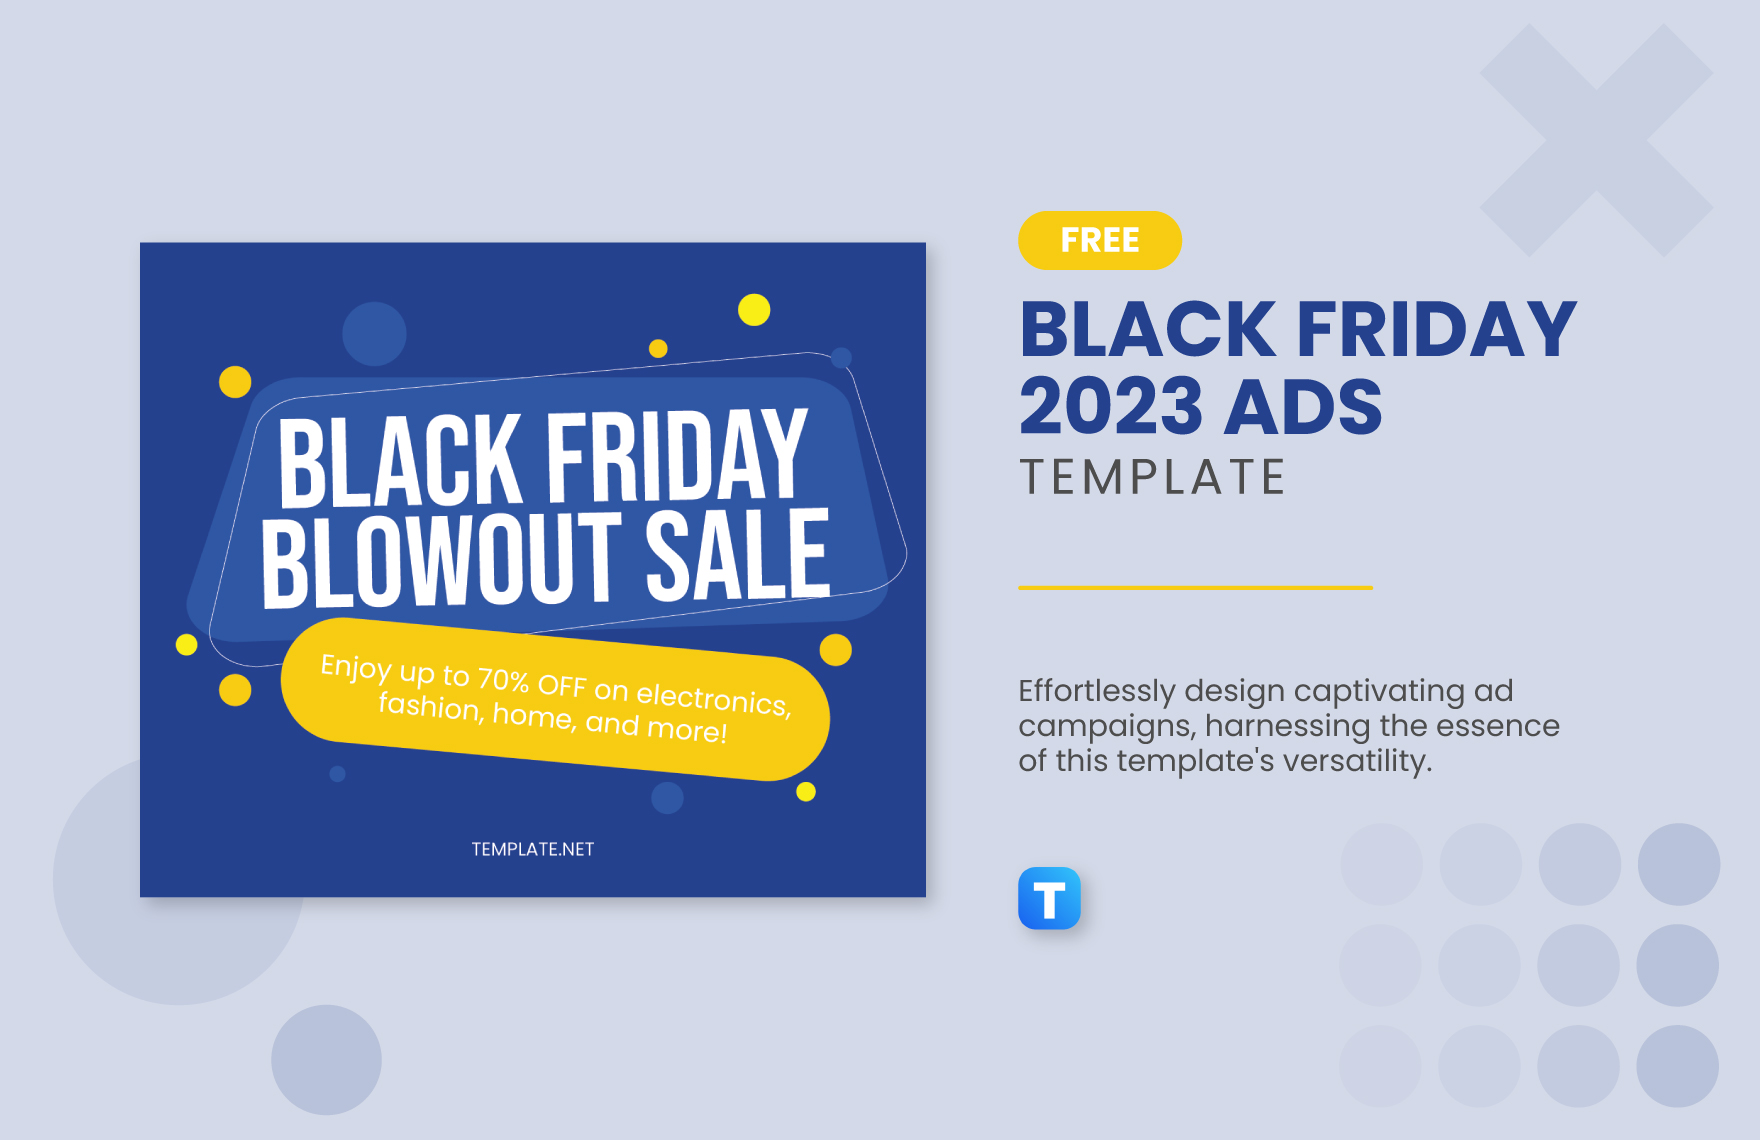 Black Friday 2023 Ads Template